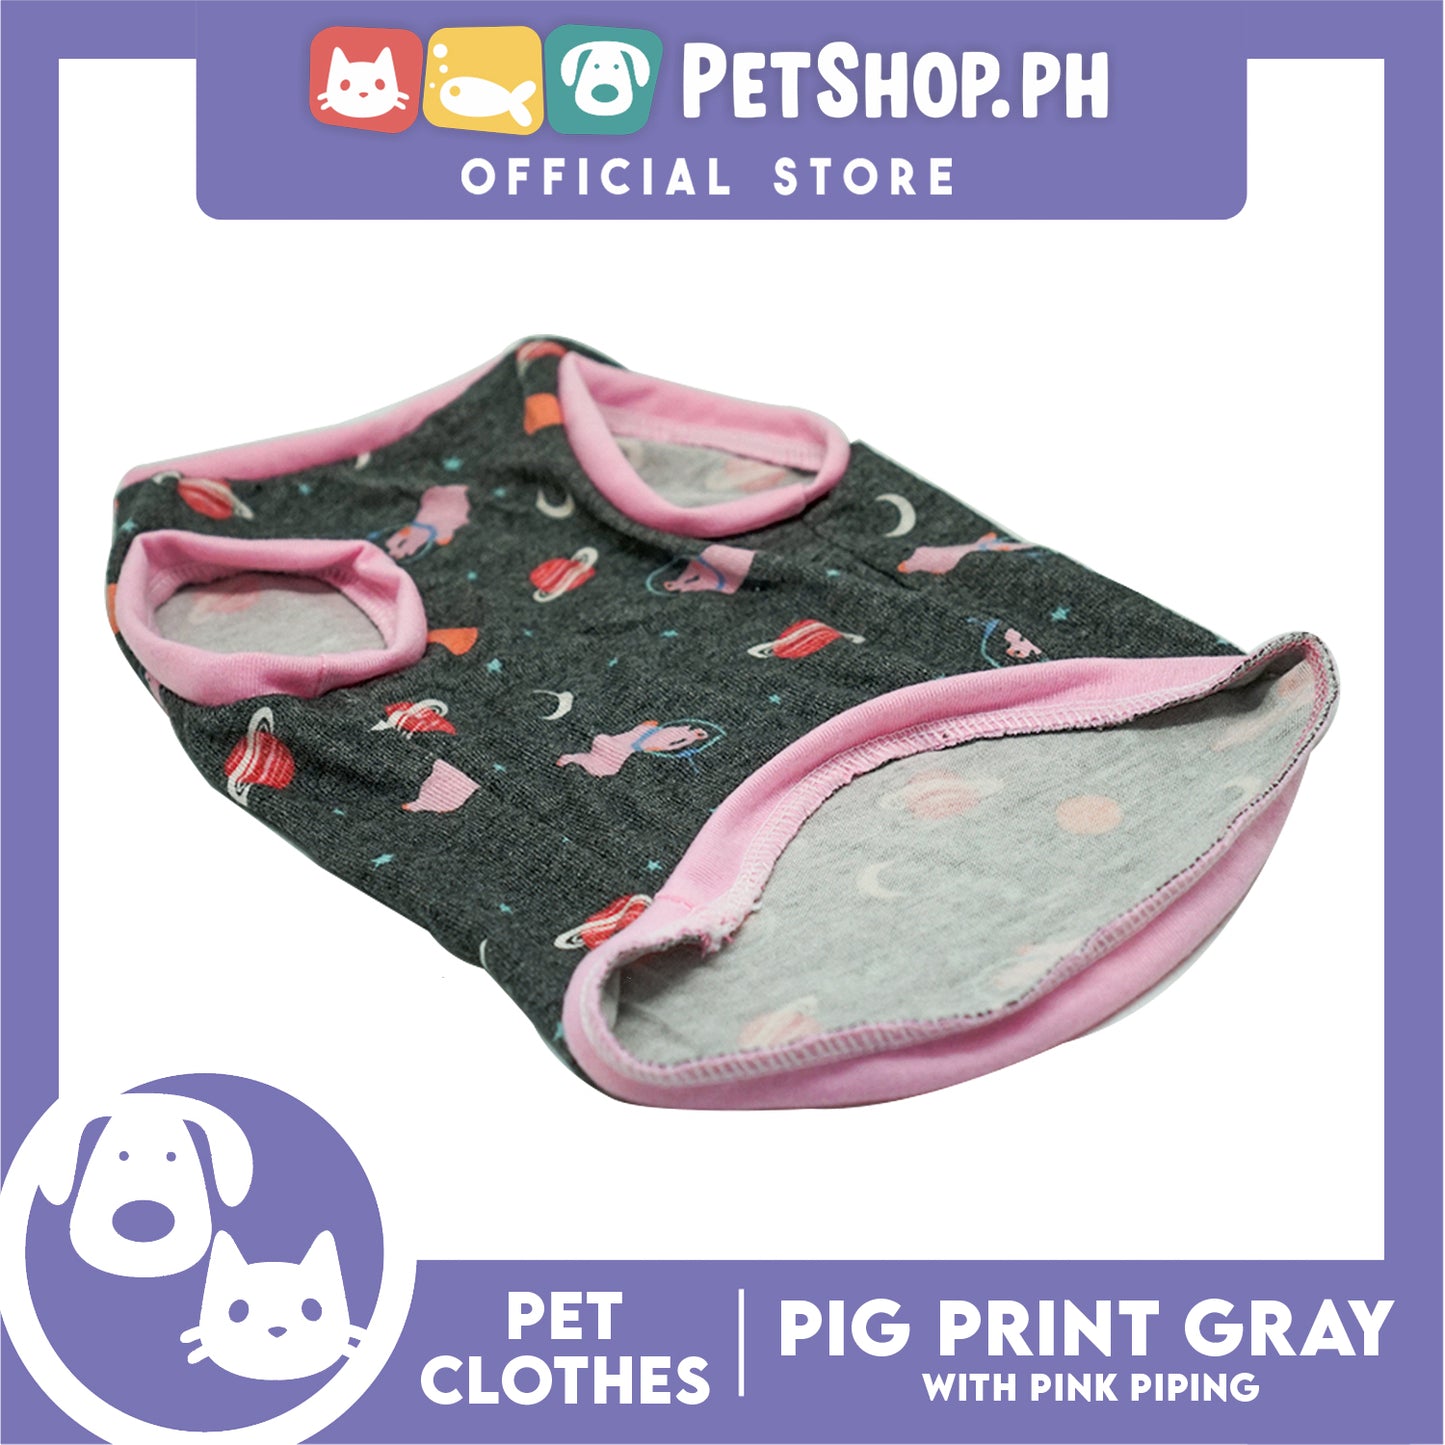 Gray Pet Sando (Small) Pink Line Pig and Galaxy Design Sando Pet Shirt Dress for Puppy, Small Dog and Cats - Sando Breathable Clothes, Pet T-shirt, Sweat Shirt